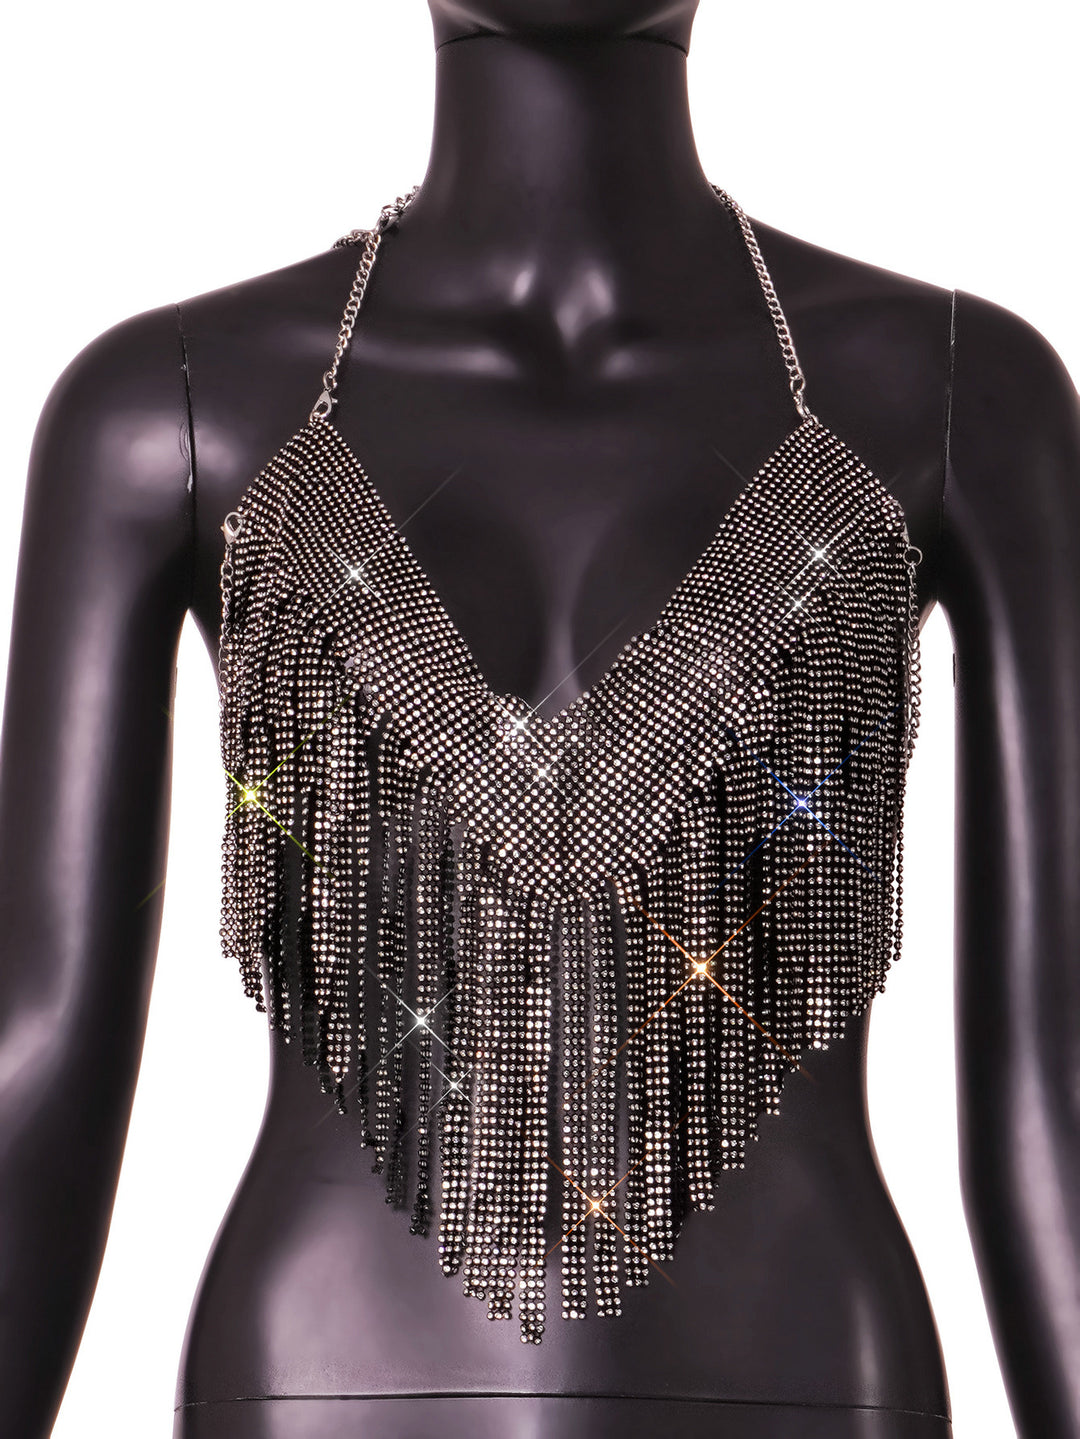 Women  Clothing Sexy Full Rhinestone Hanky Hem Tassel Exposed Cropped Deep V Plunge Vest Camisole Cropped Outfit Top